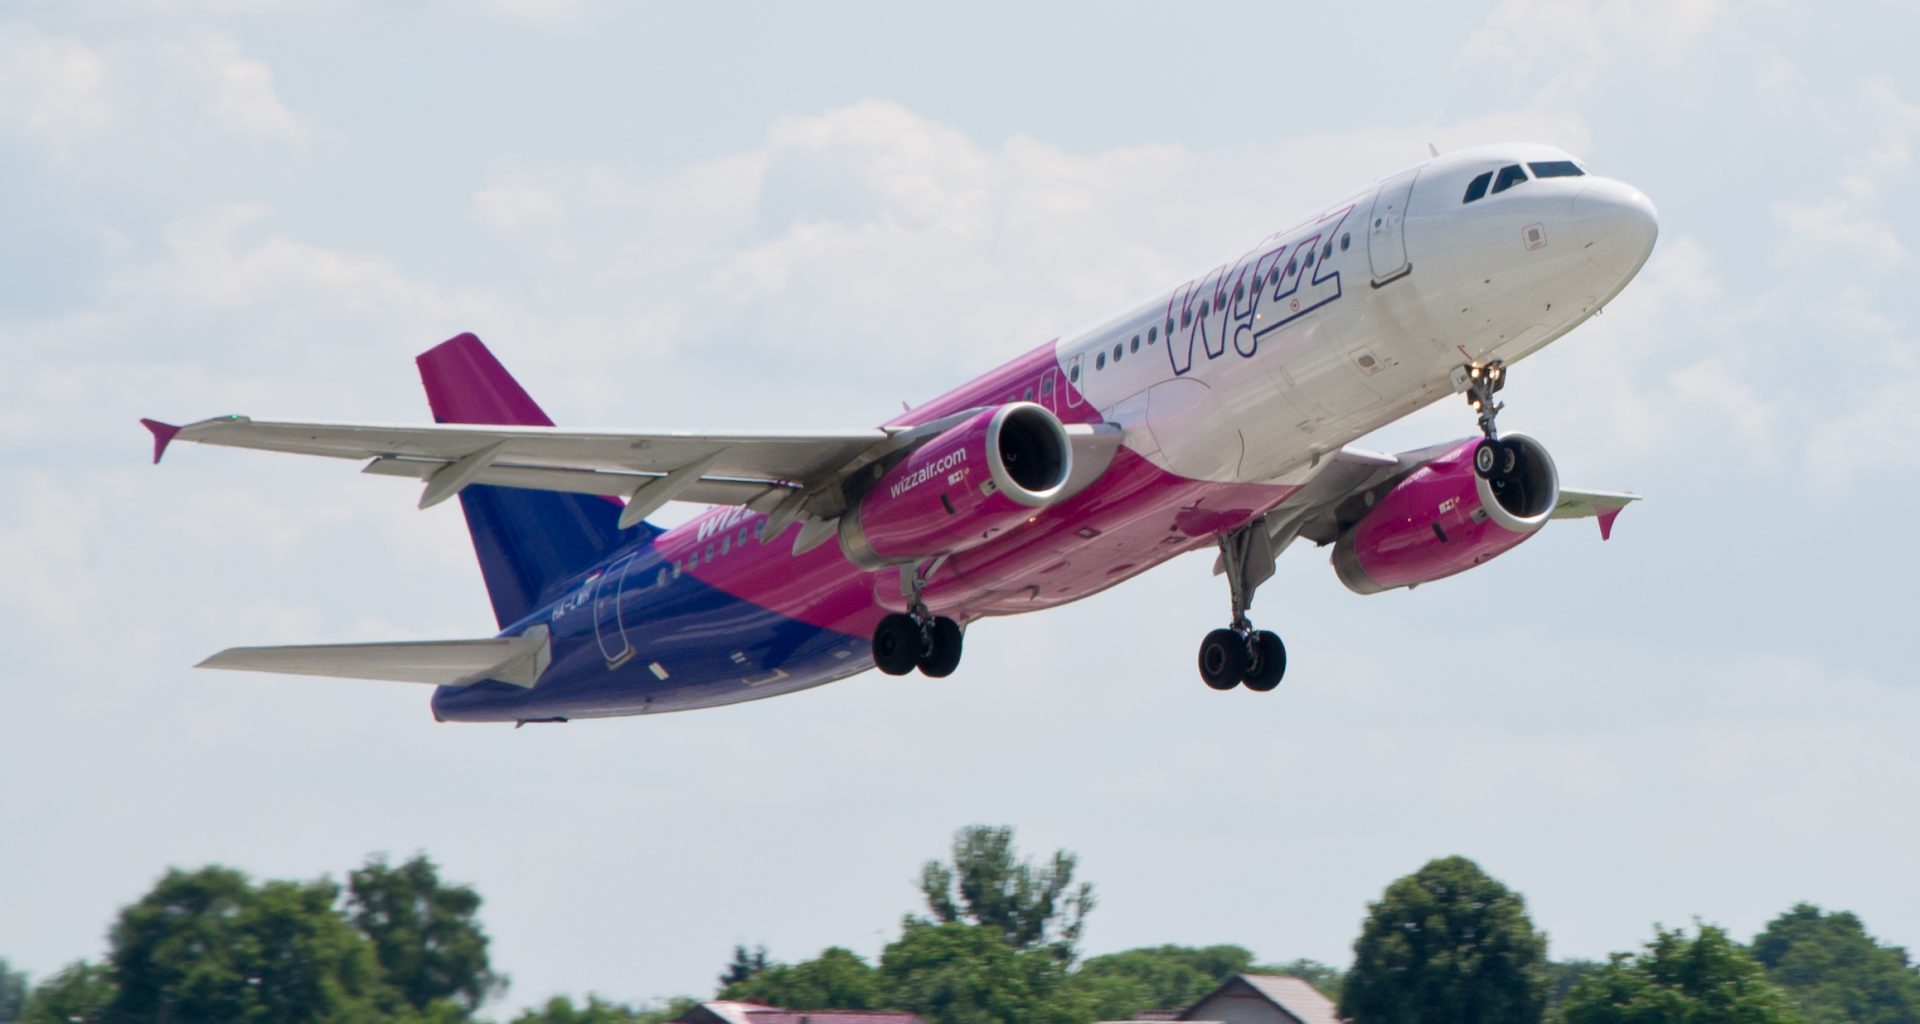 Wizz Air A320 taking off. @ Wizzairhungary / https://commons.wikimedia.org/wiki/File:Wizz_air_new_livery_aircraft.jpg